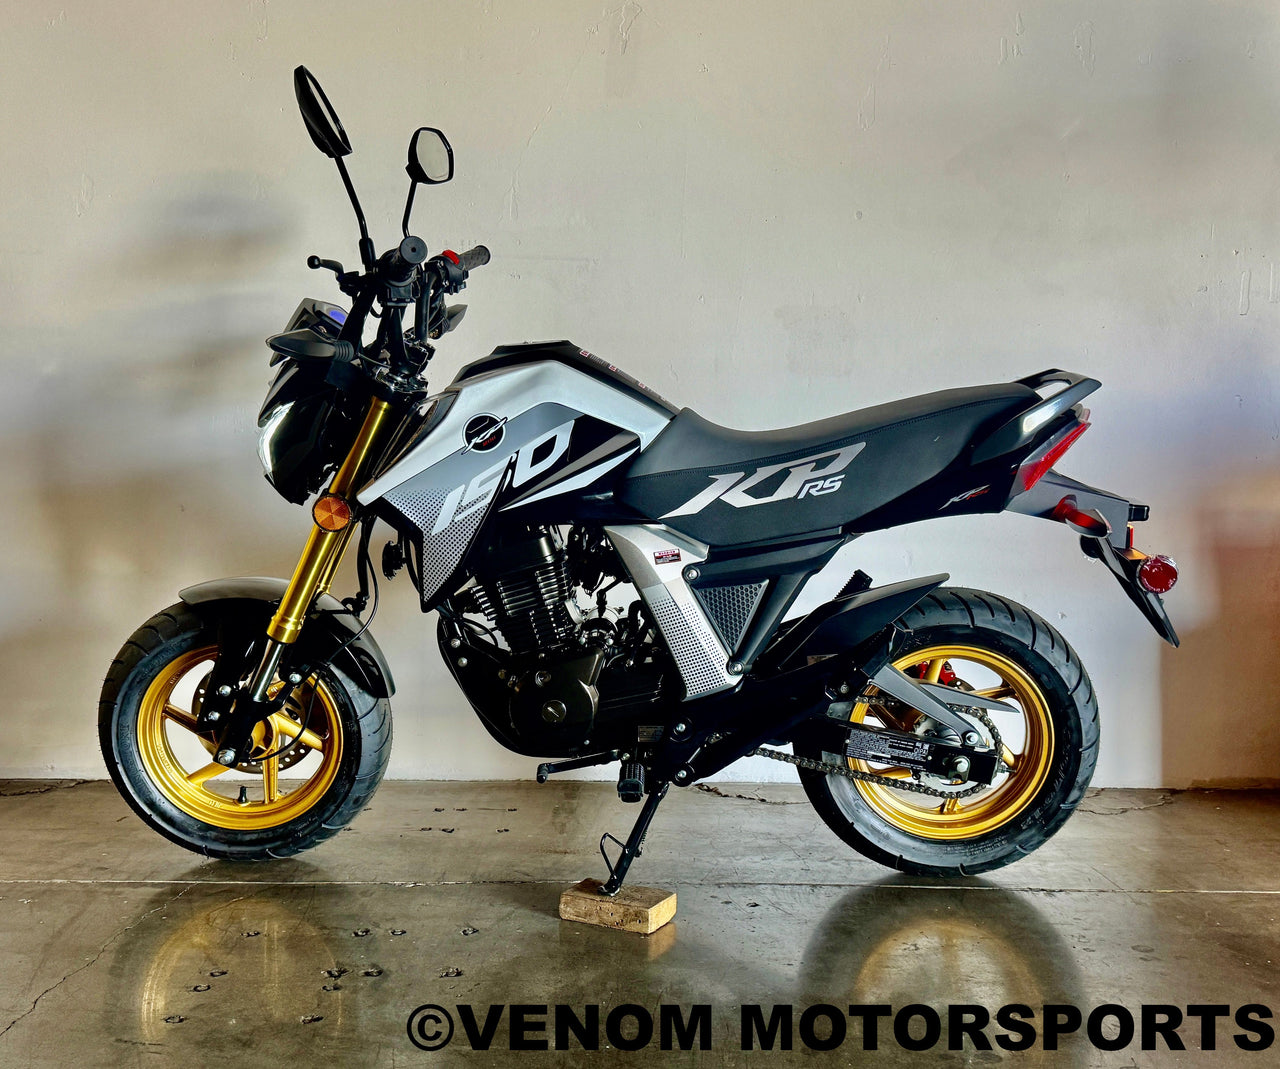 Lifan KP-Mini RS | 150cc EFI Motorcycle | Fuel Injected | Street Legal [PRE-ORDER]